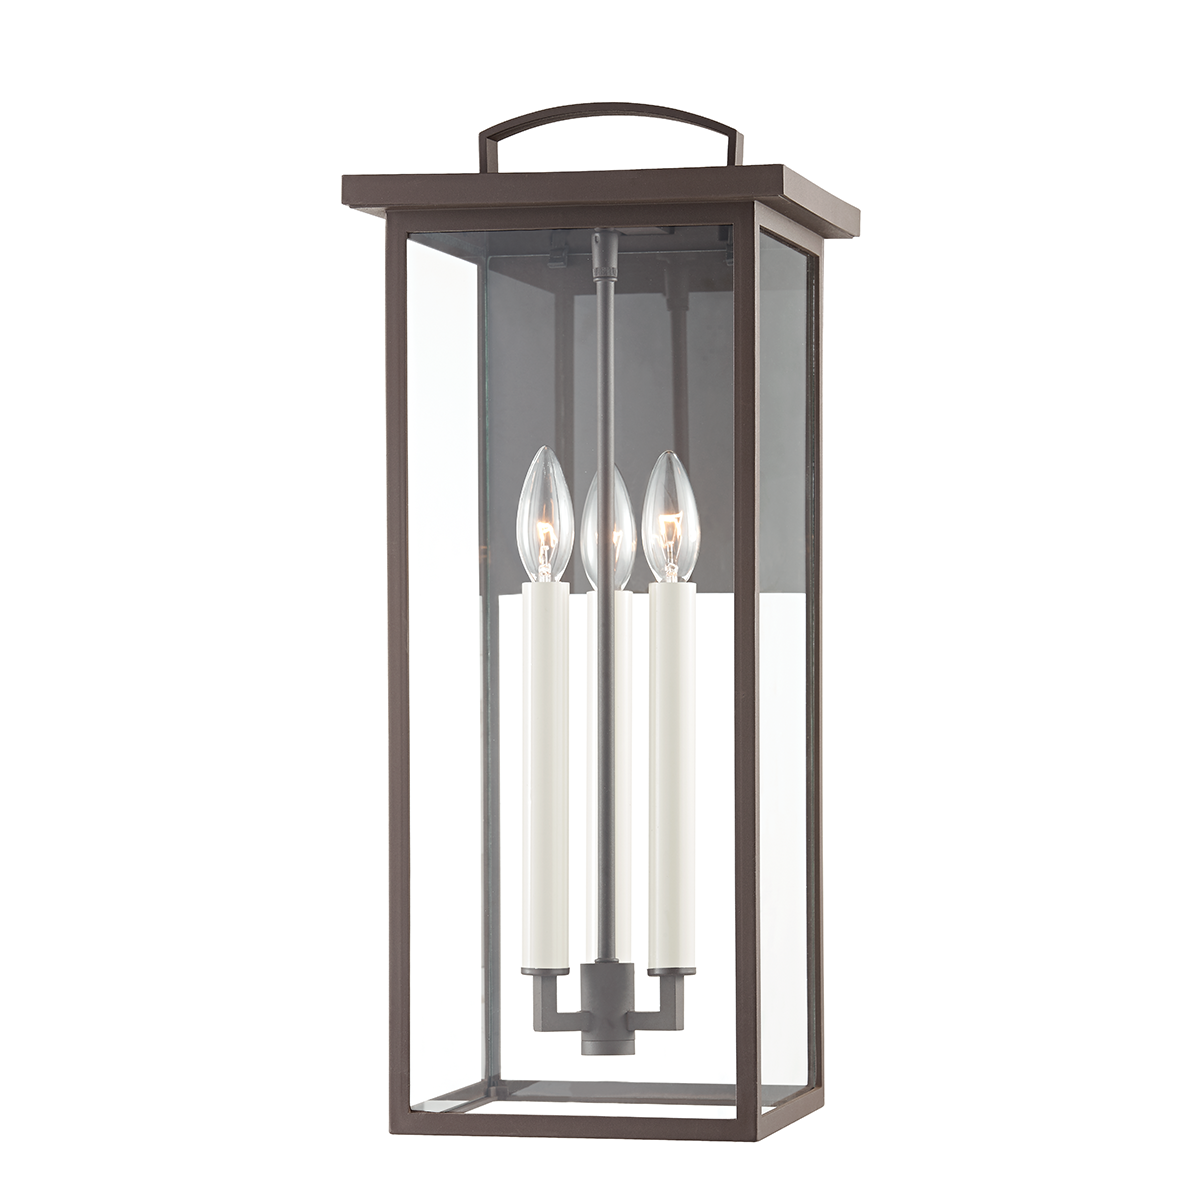 Troy EDEN 3 LIGHT LARGE EXTERIOR WALL SCONCE B7523 Outdoor l Wall Troy Lighting   